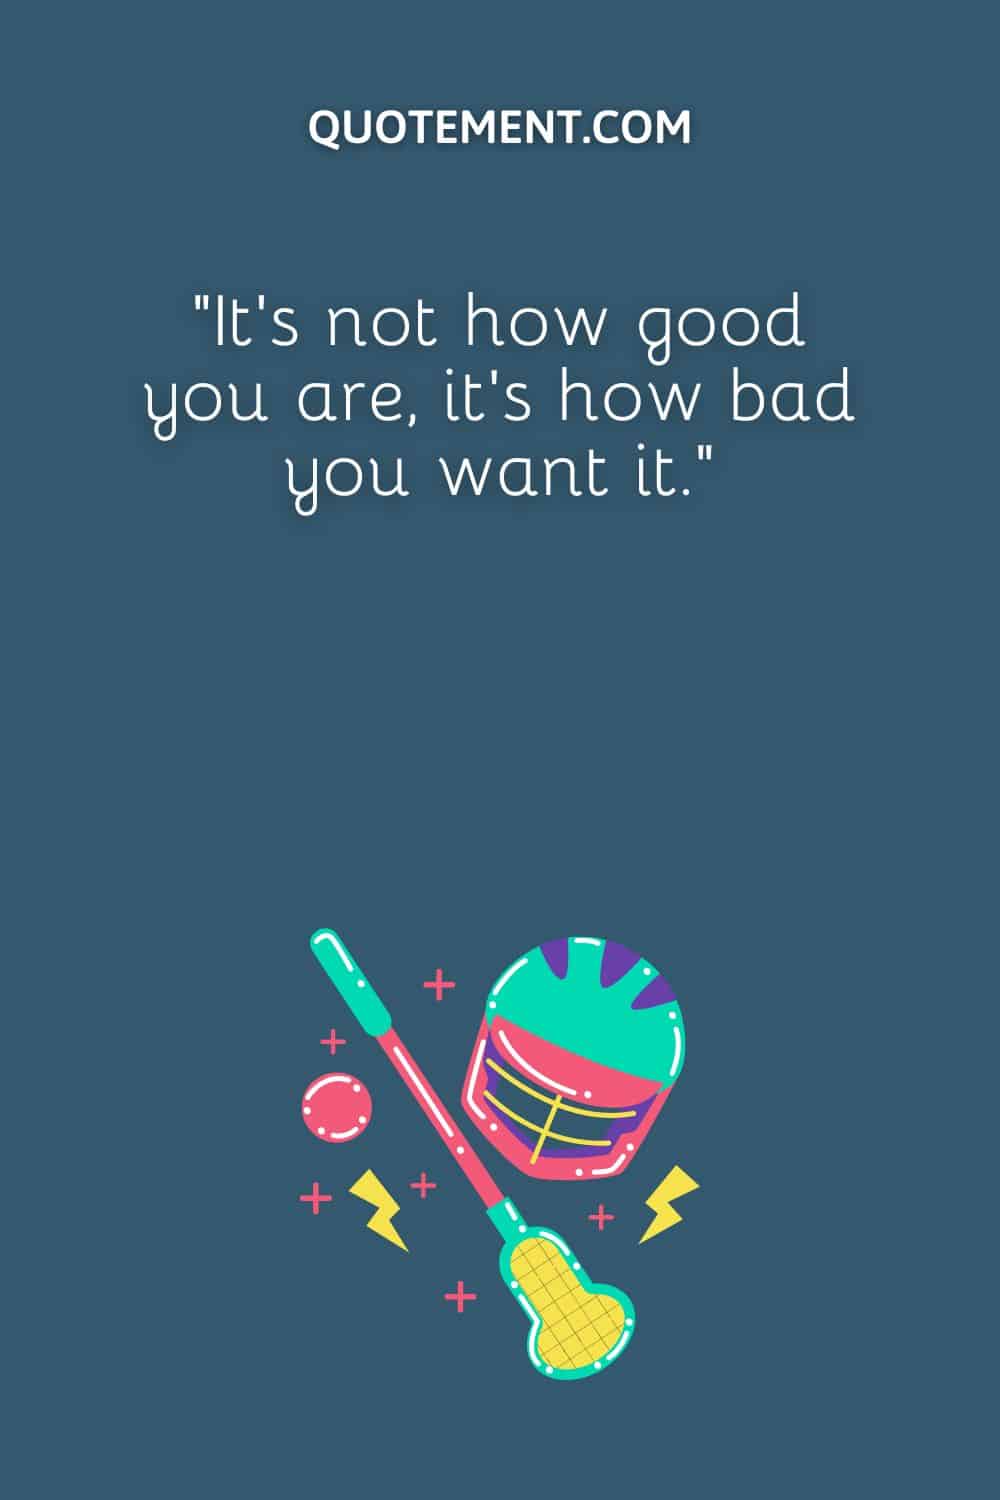 “It’s not how good you are, it’s how bad you want it.”